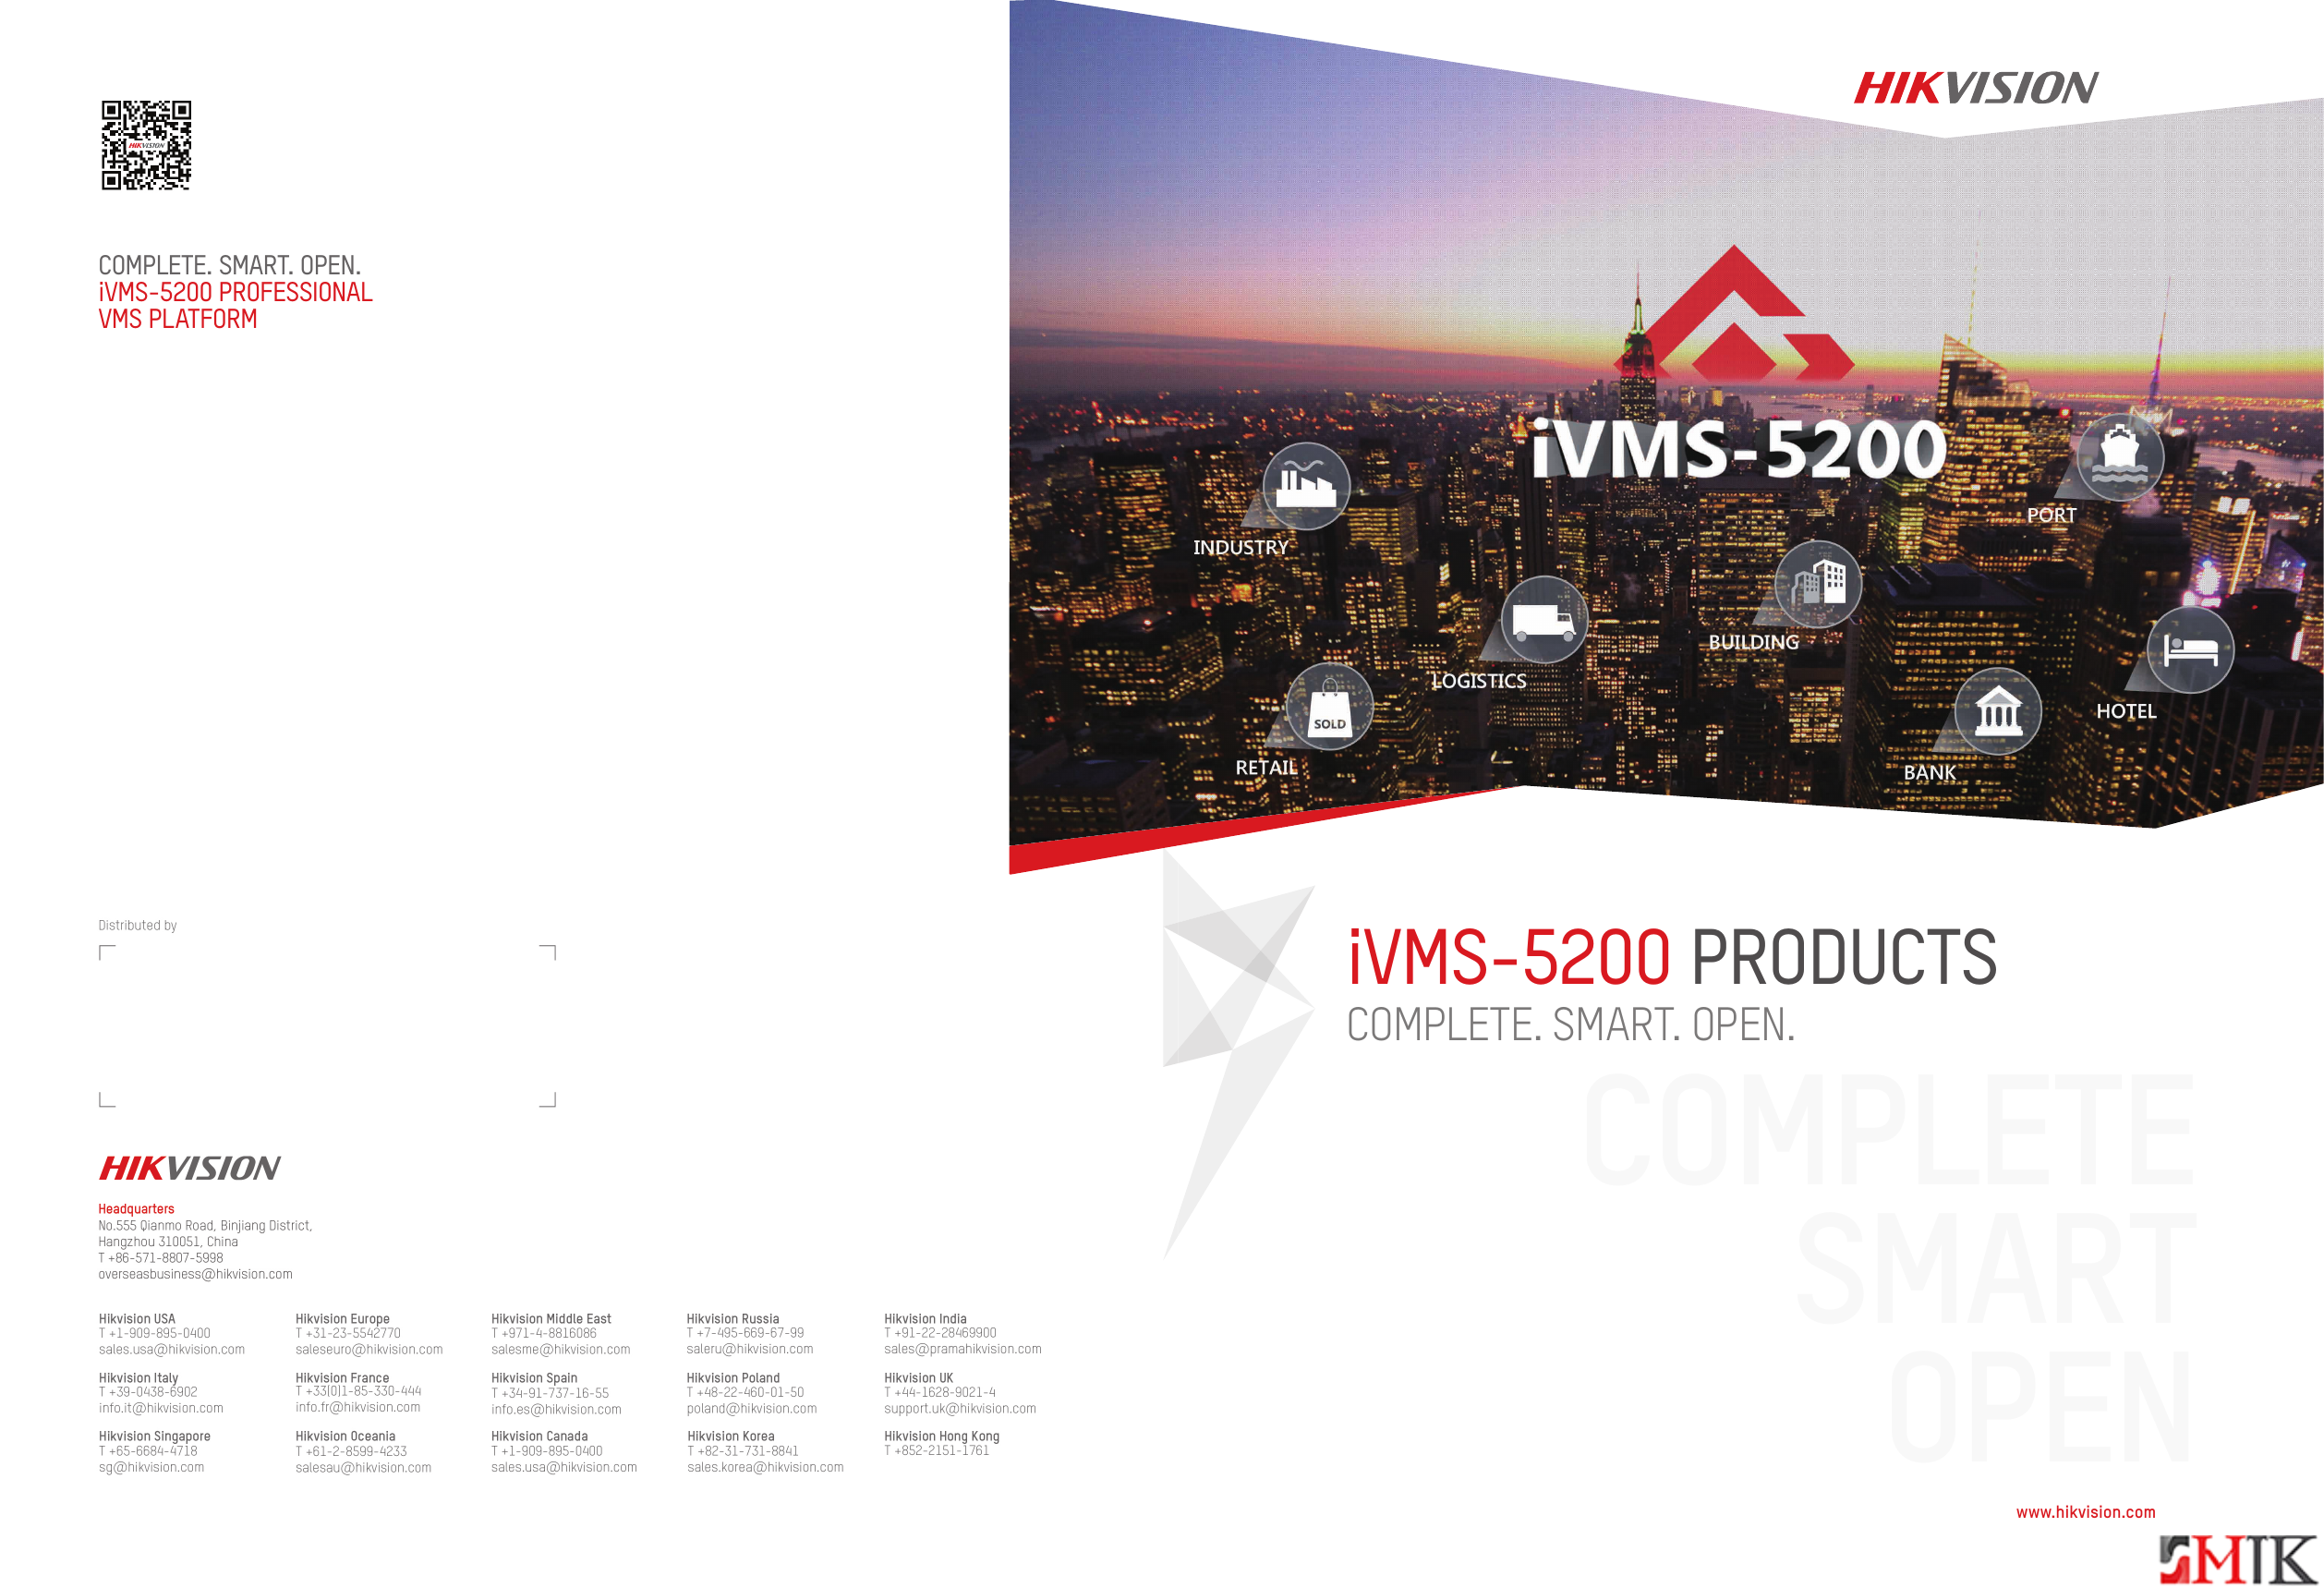 hikvision ivms 5200